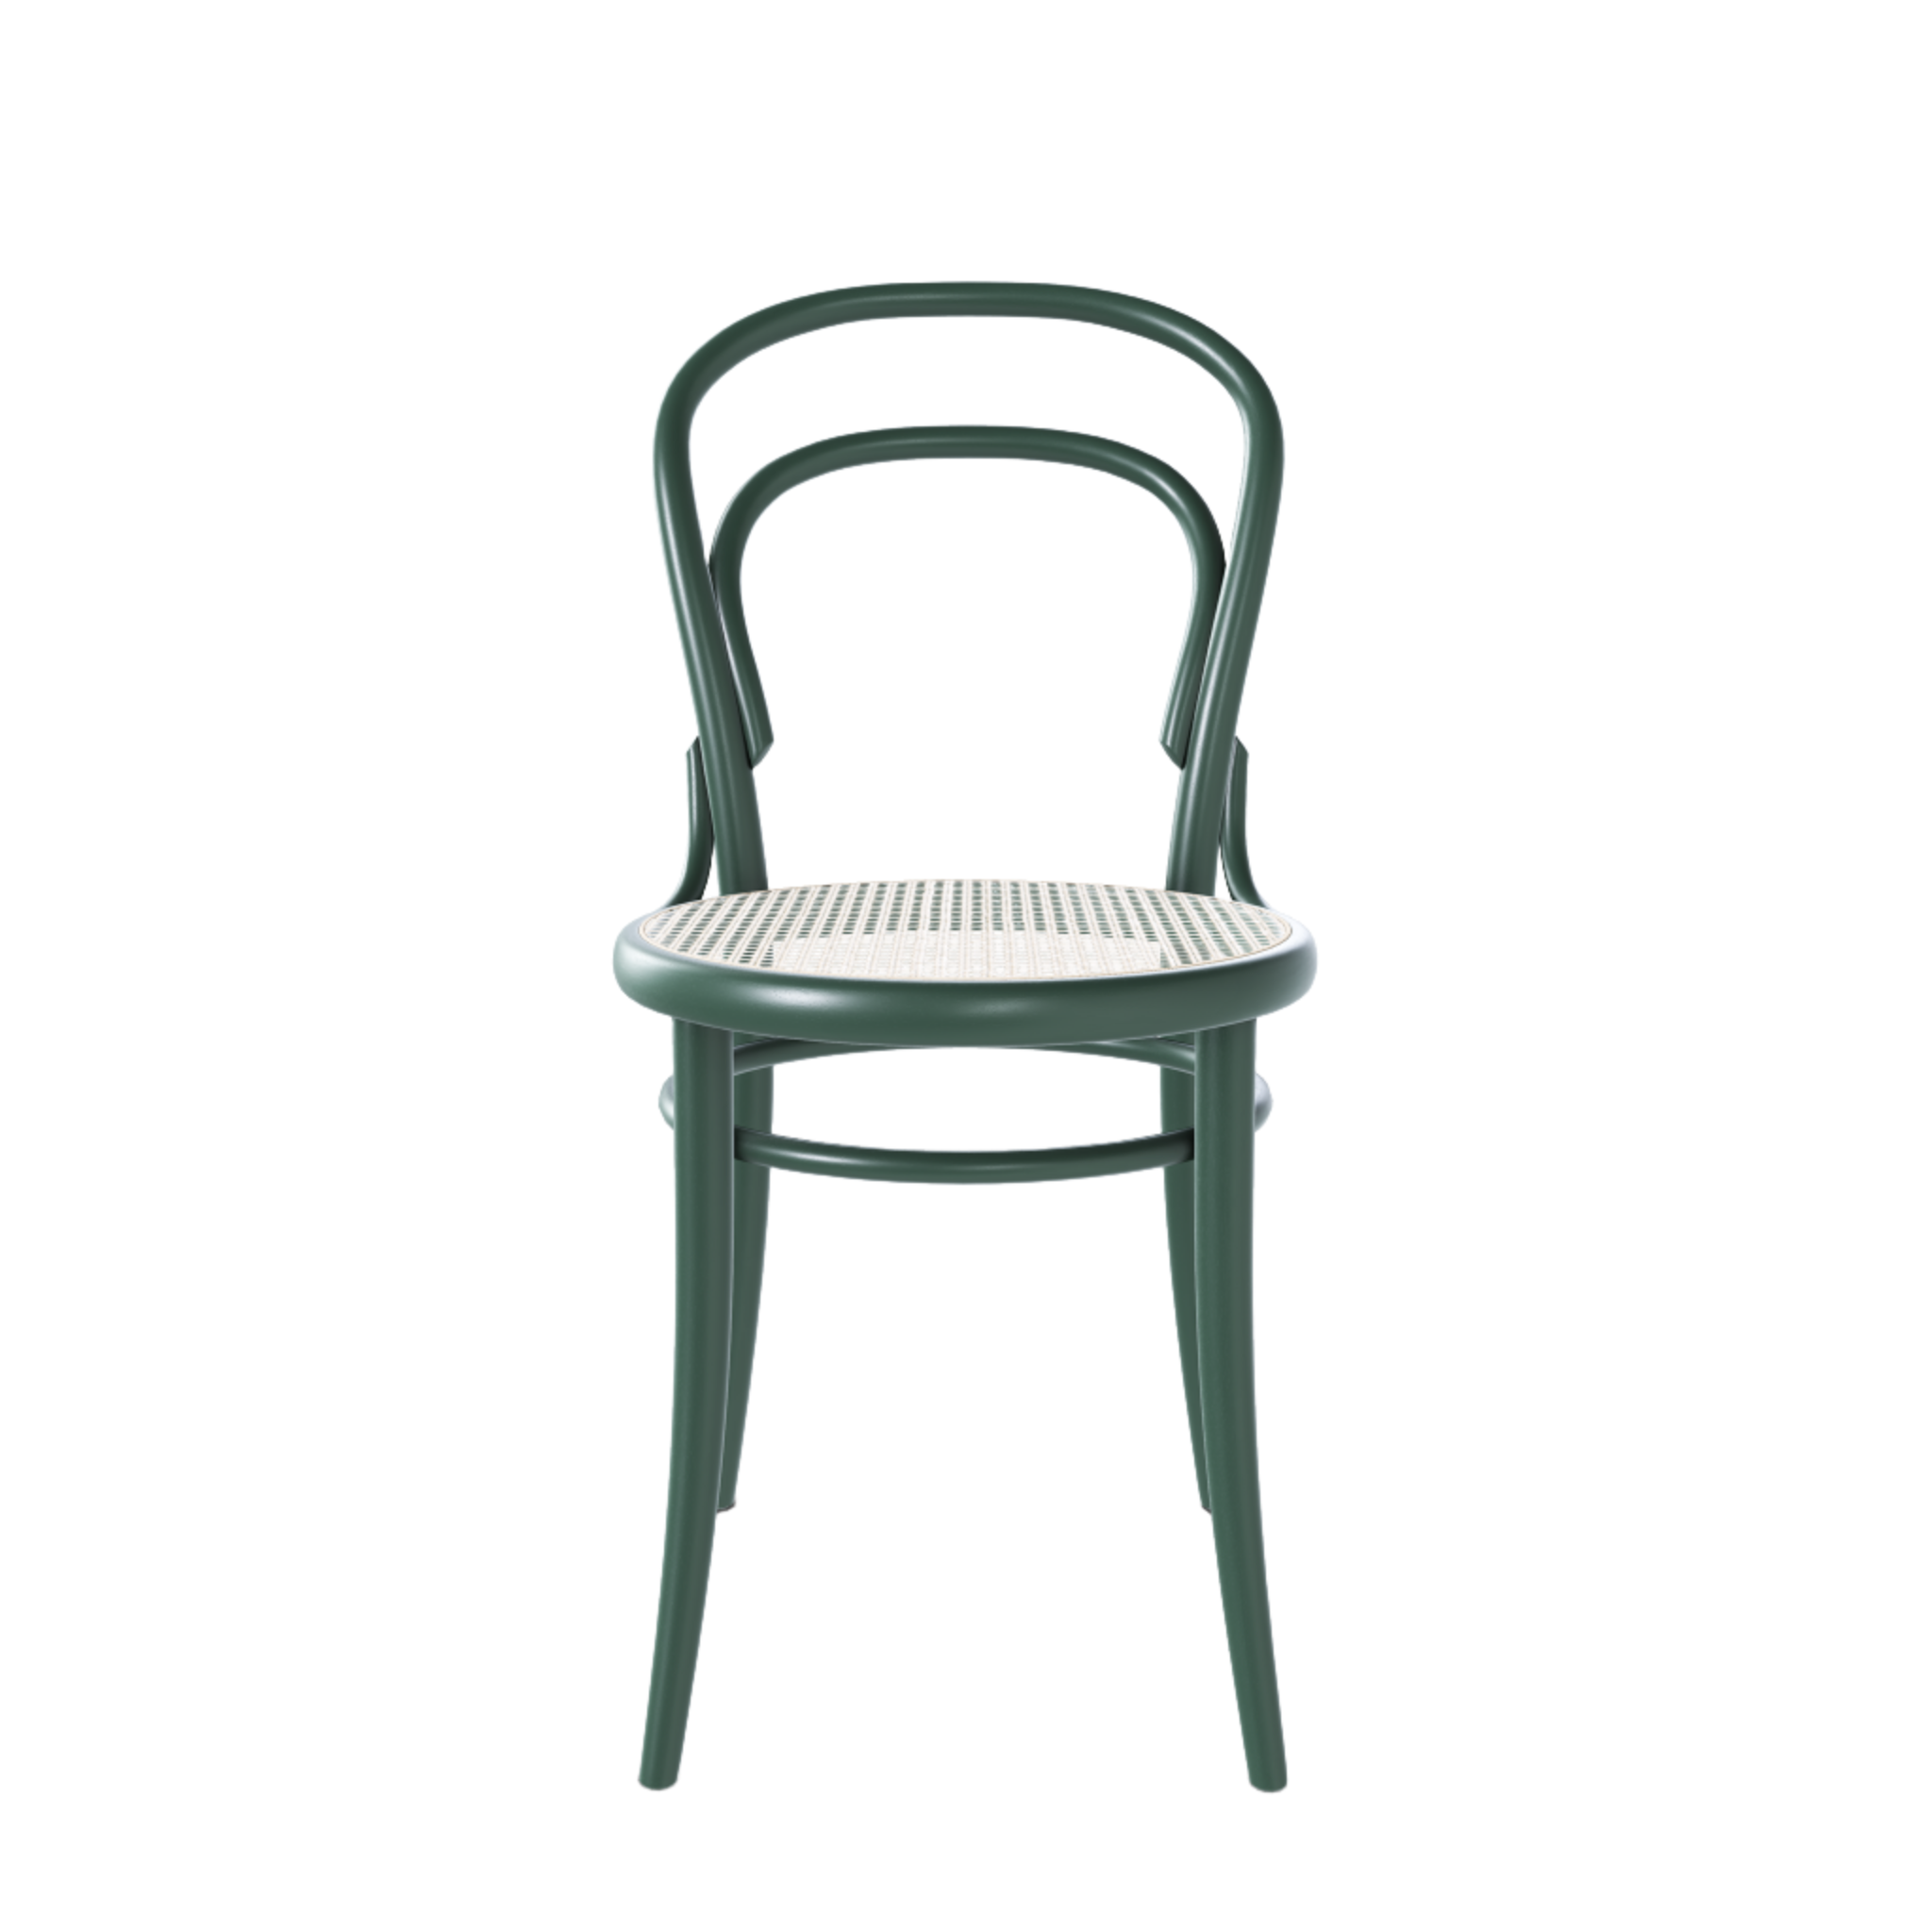 Ton 14 Dining Chair with cane seat in deep green